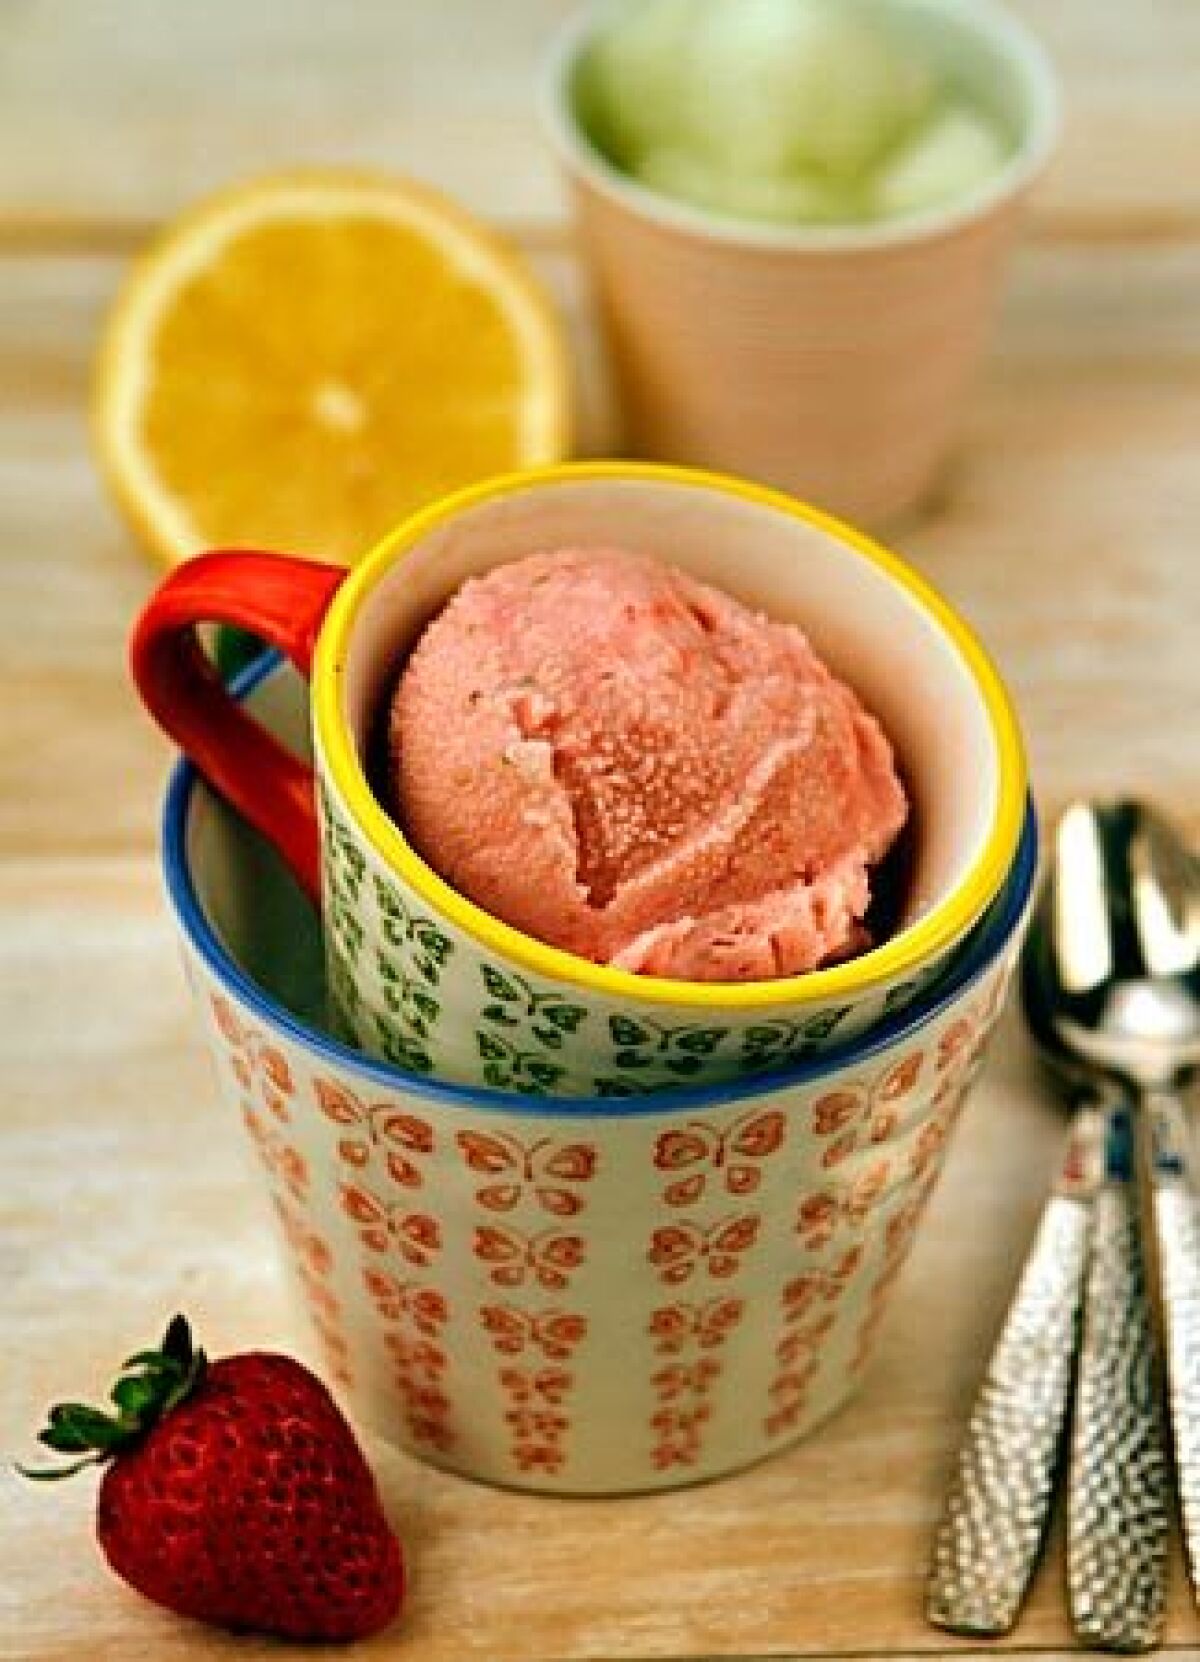 The strawberry gelato above is milk-based; the lemon is not. The emphasis is on freshness.